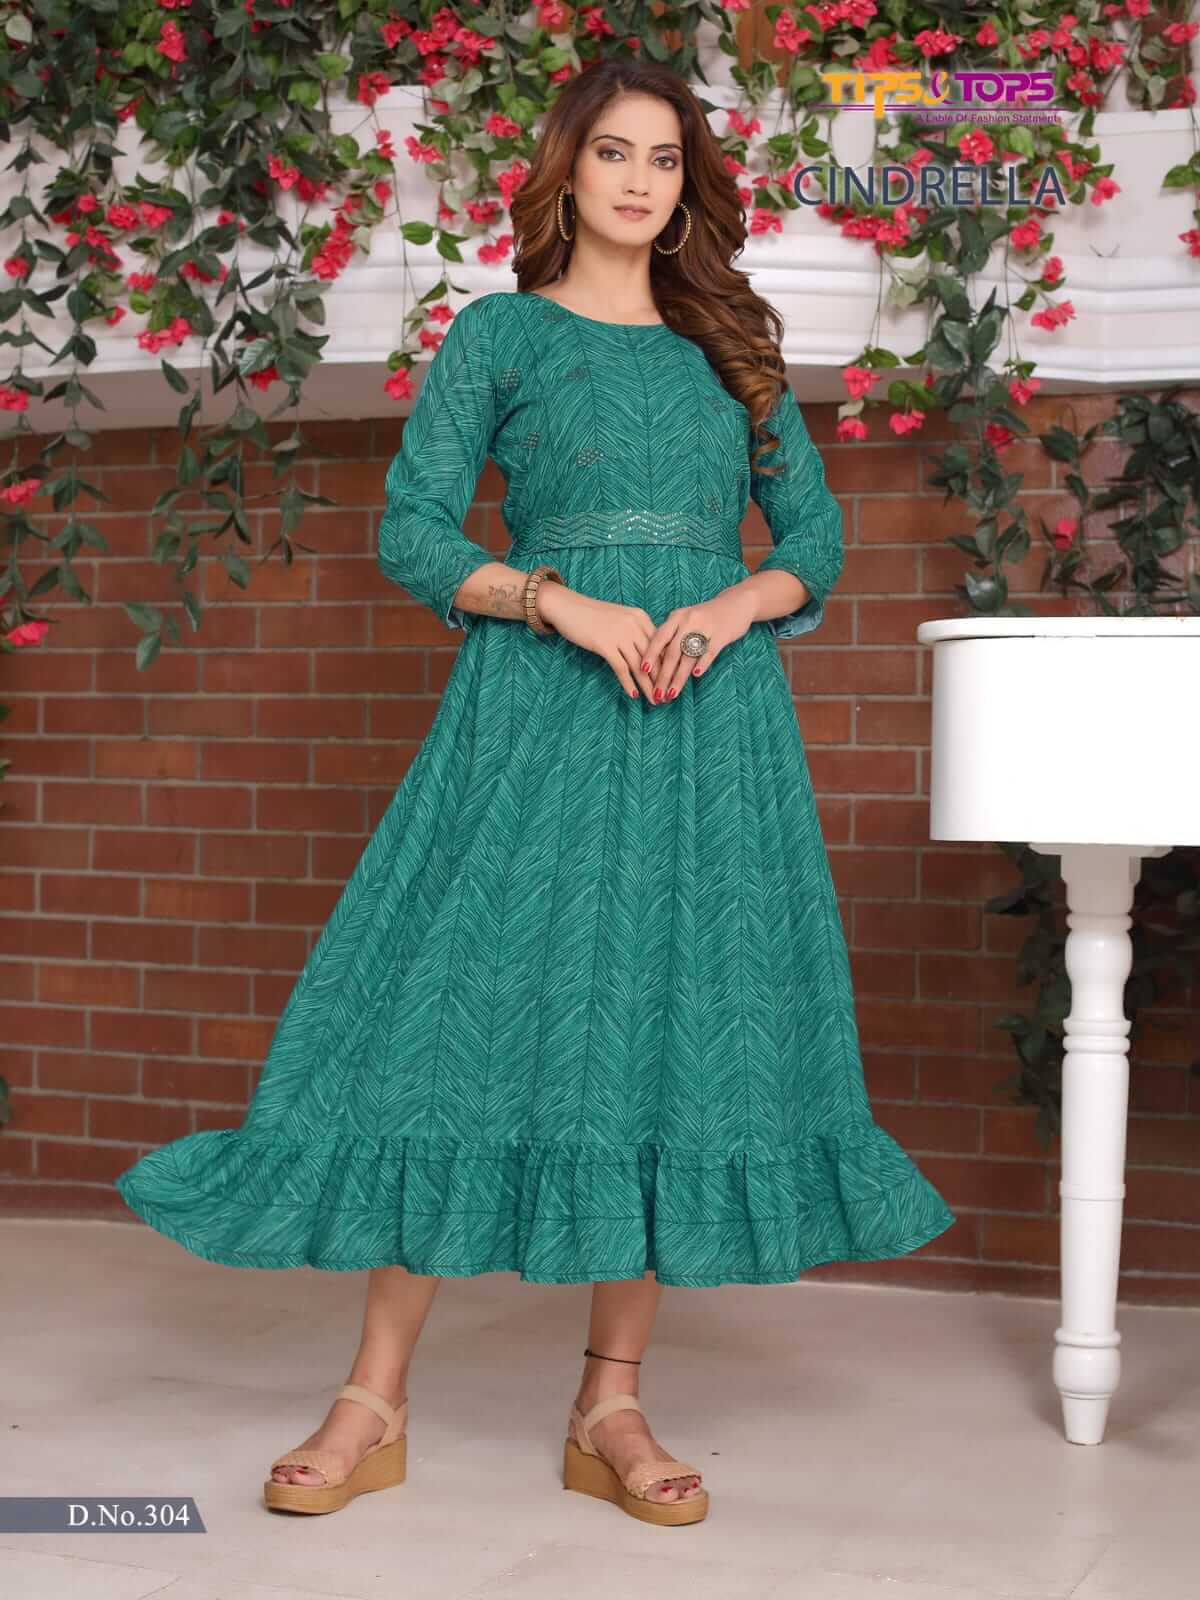 Tips And Tops Cindrella Vol 3 One Piece Dress Catalog collection 6